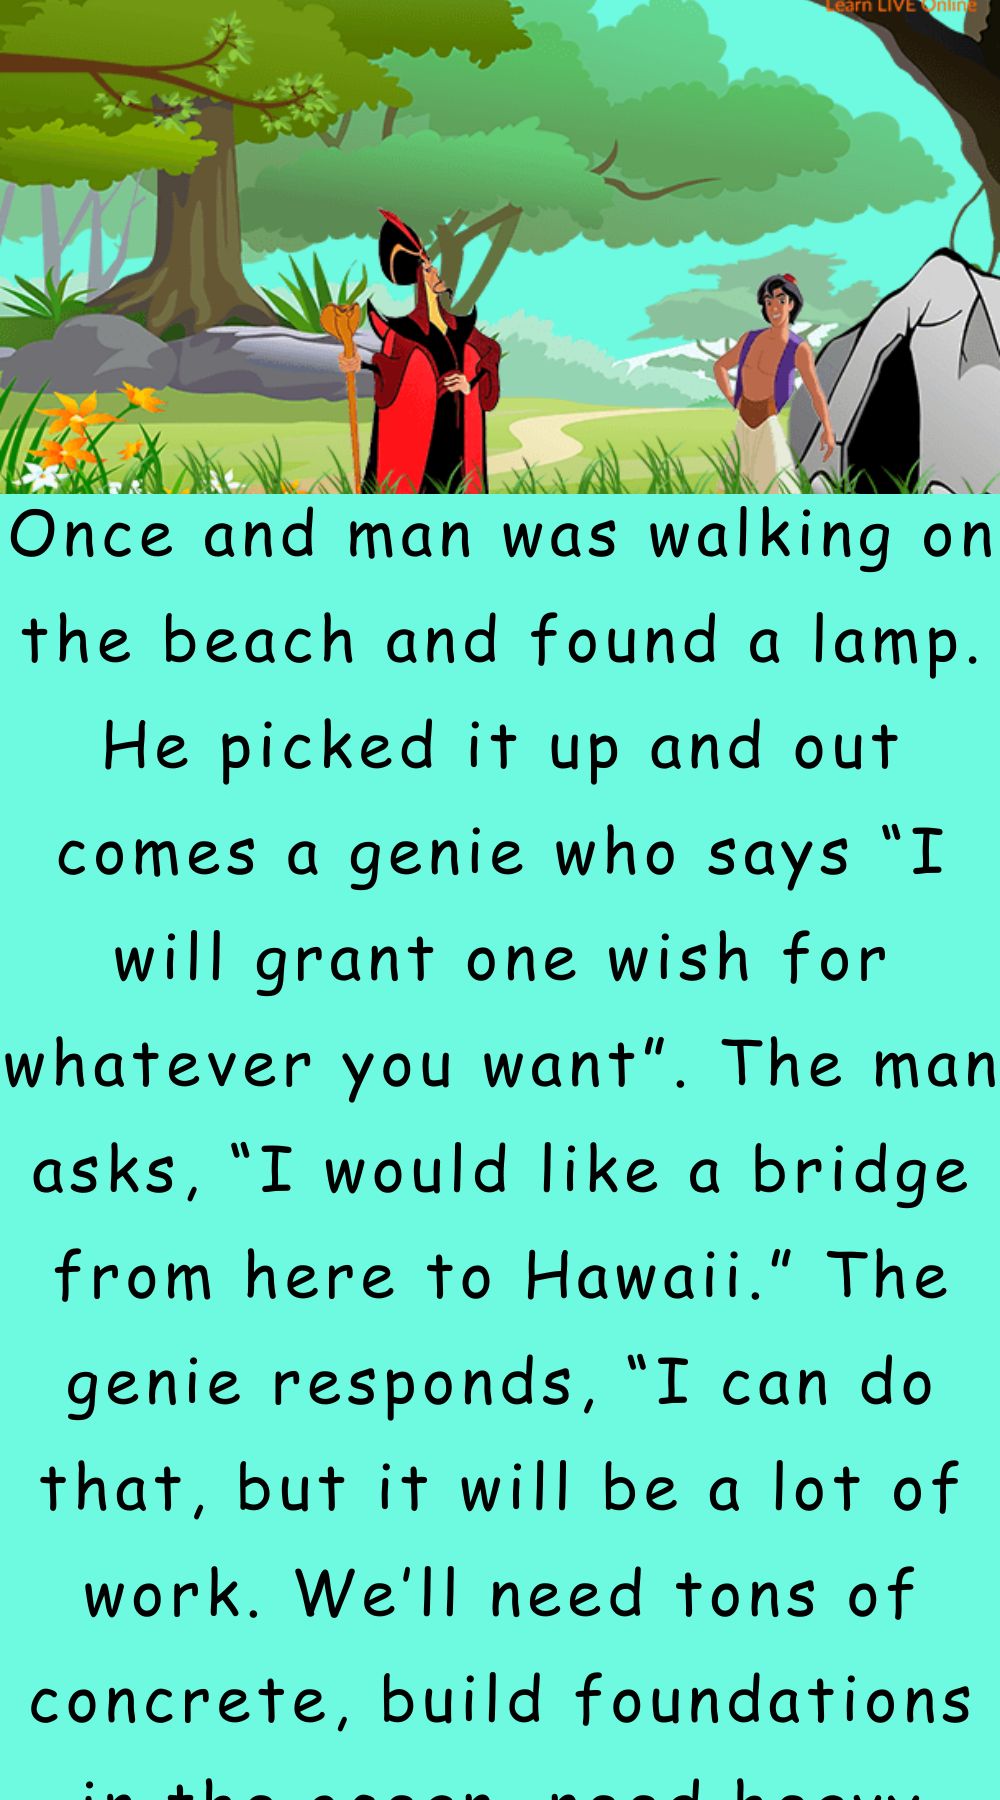 Once and man was walking on the beach and found a lamp